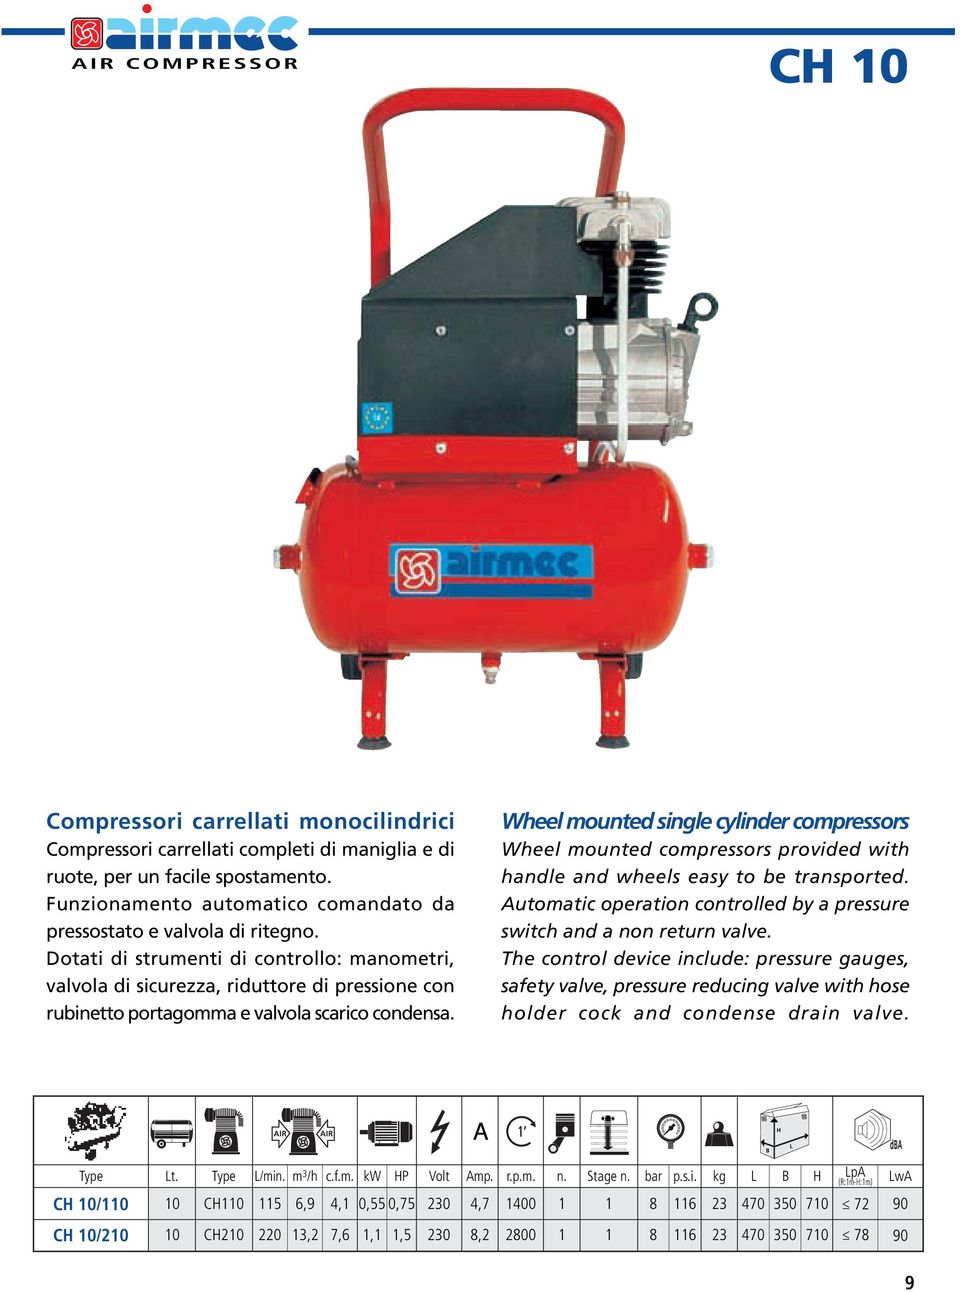 Wheel mounted single cylinder compressors Wheel mounted compressors provided with handle and wheels easy to be transported. Automatic operation controlled by a pressure switch and a non return valve.